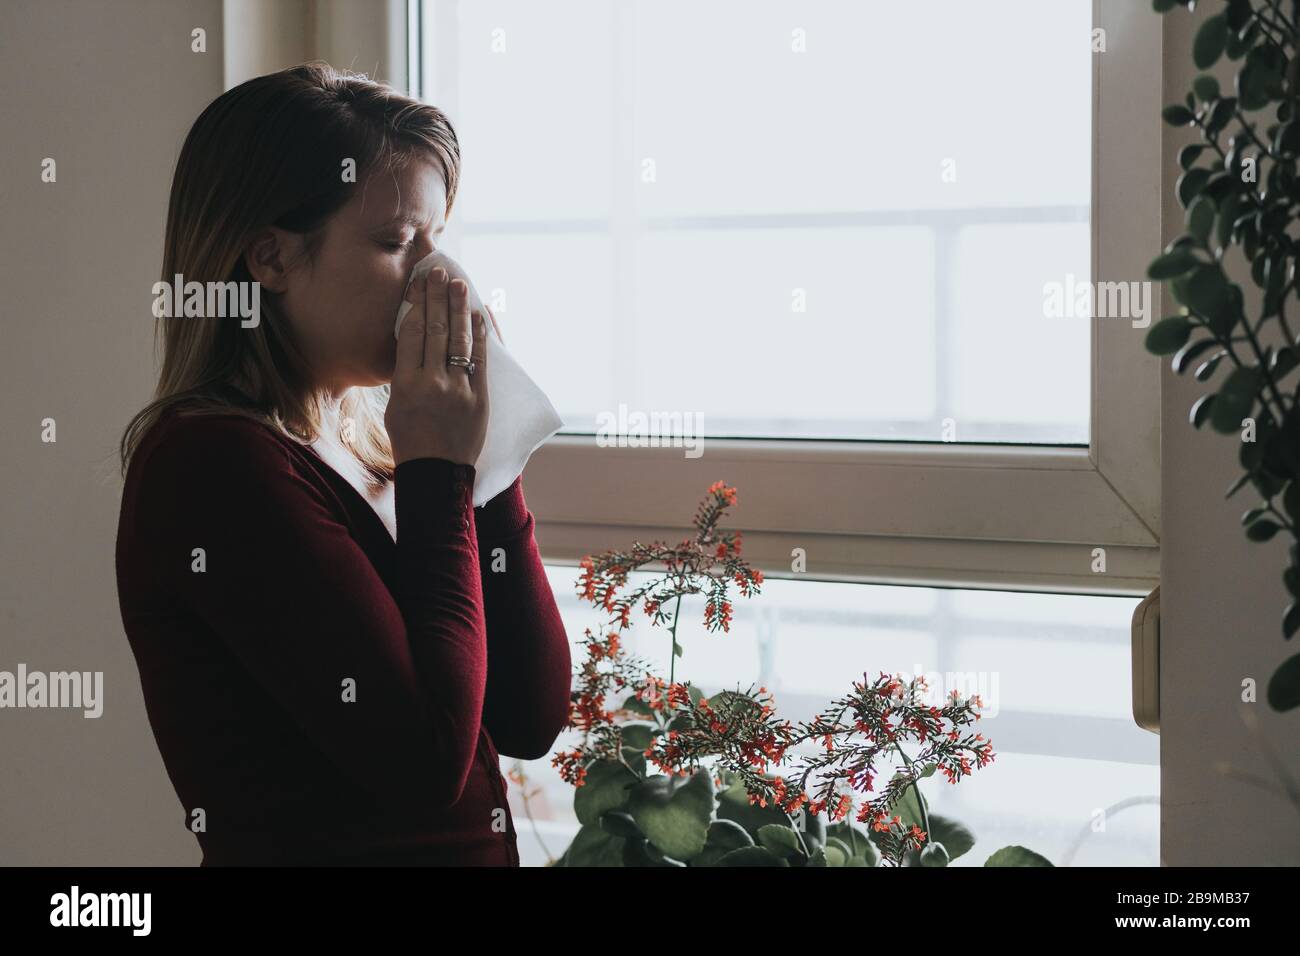 Young sick woman blowing her nose into a handkerchief by the window Stock Photo